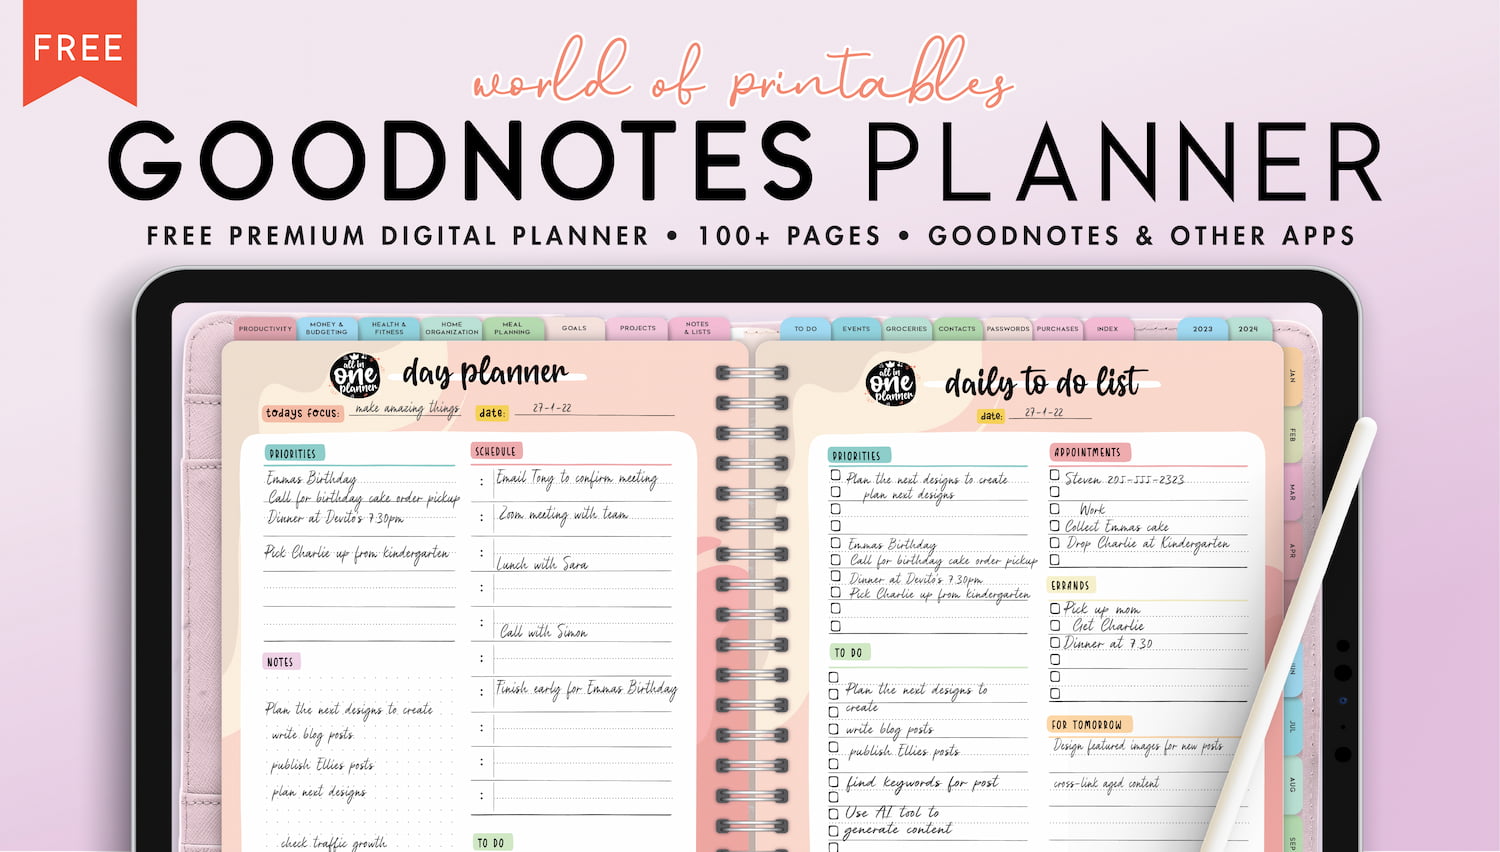 35 Useful and Beautiful GoodNotes Templates Resources & Inspirations